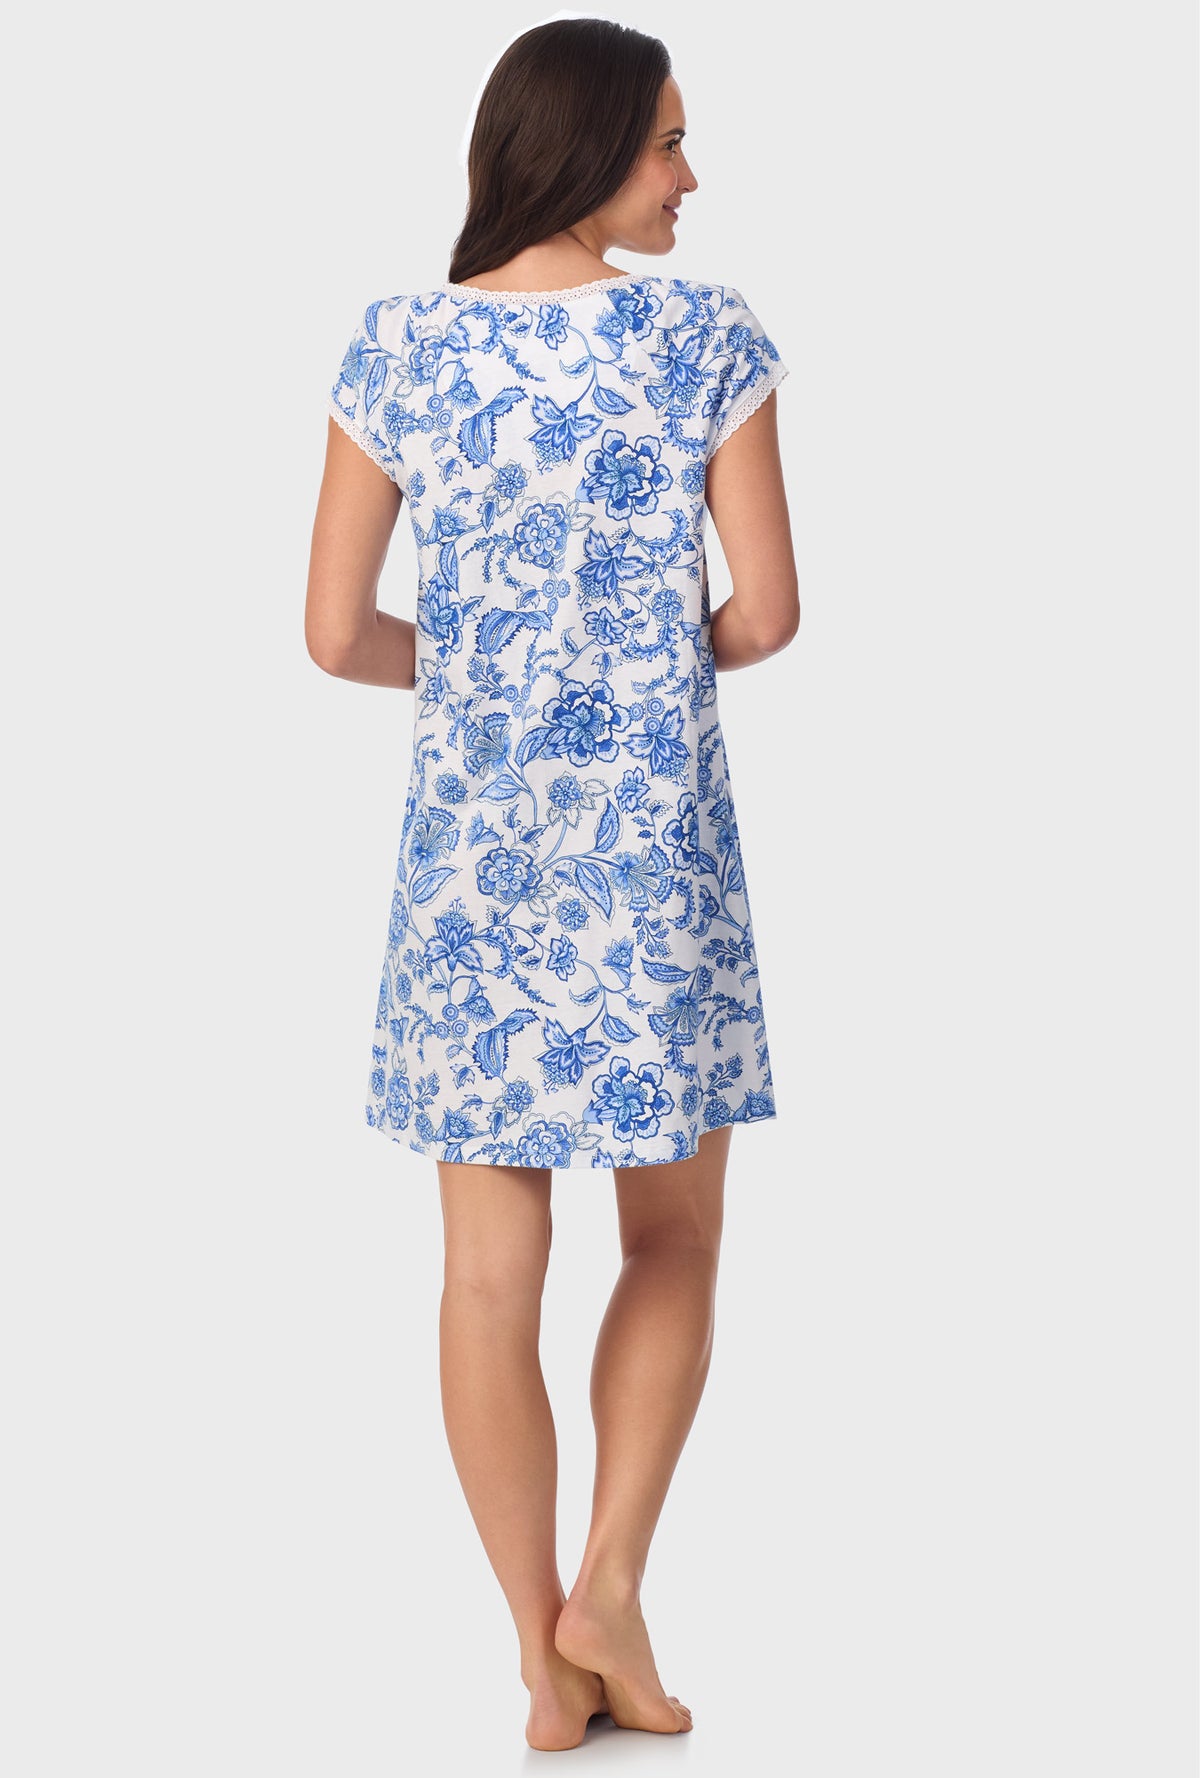 A lady wearing blue short Sleeve  Floral Vine Cap Sleeve Nightshirt with Colbalt Blue print